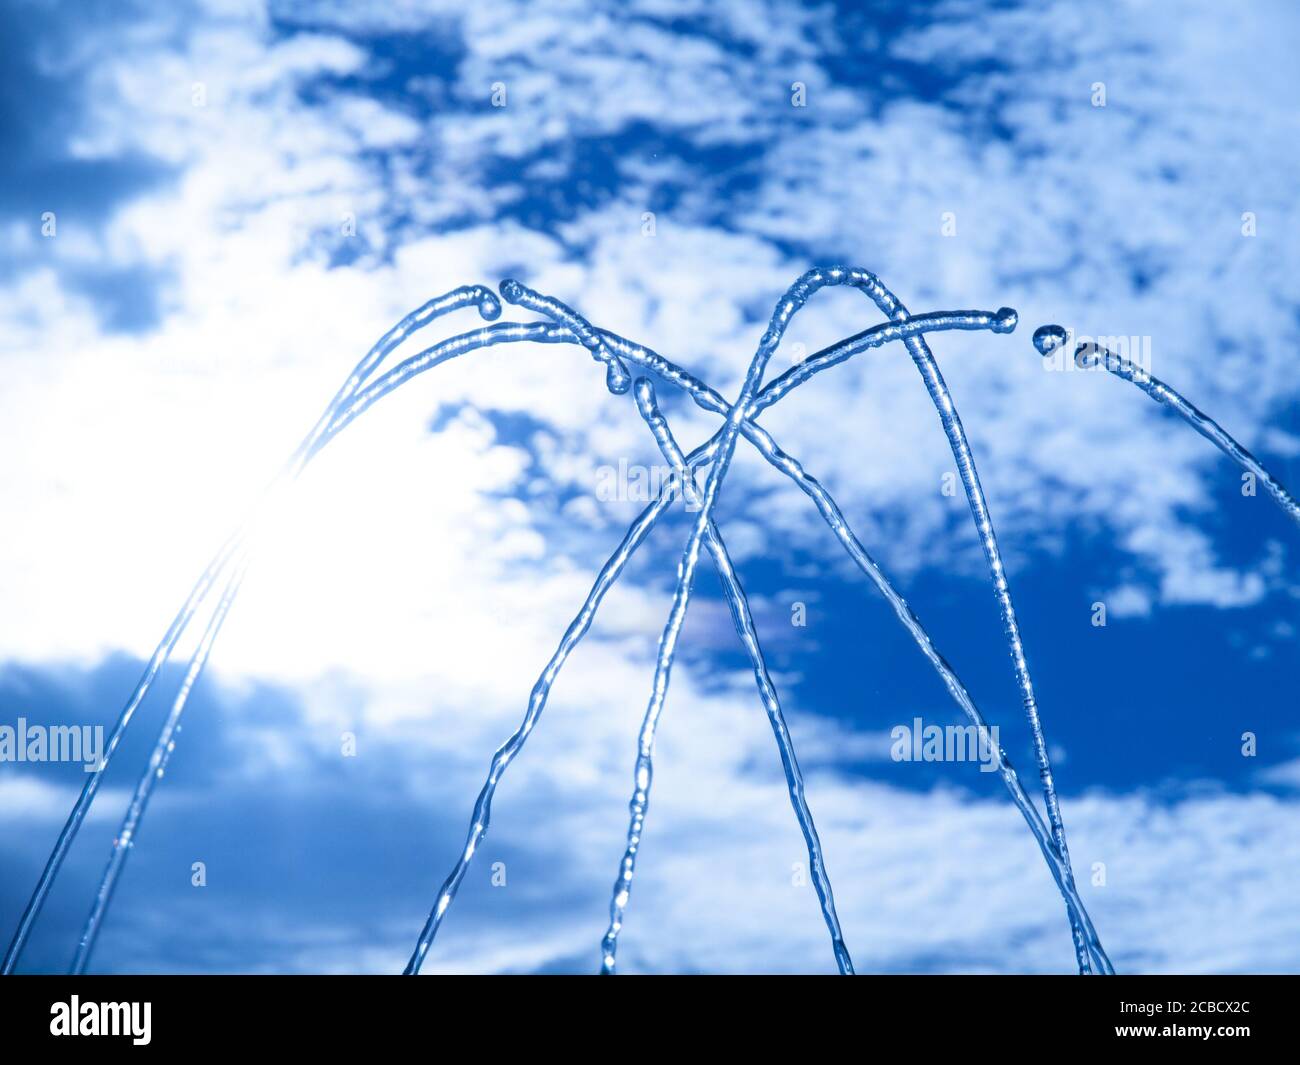 Fountain fresh water splash on hot summer sky background. Clear water or refreshment theme. Stock Photo